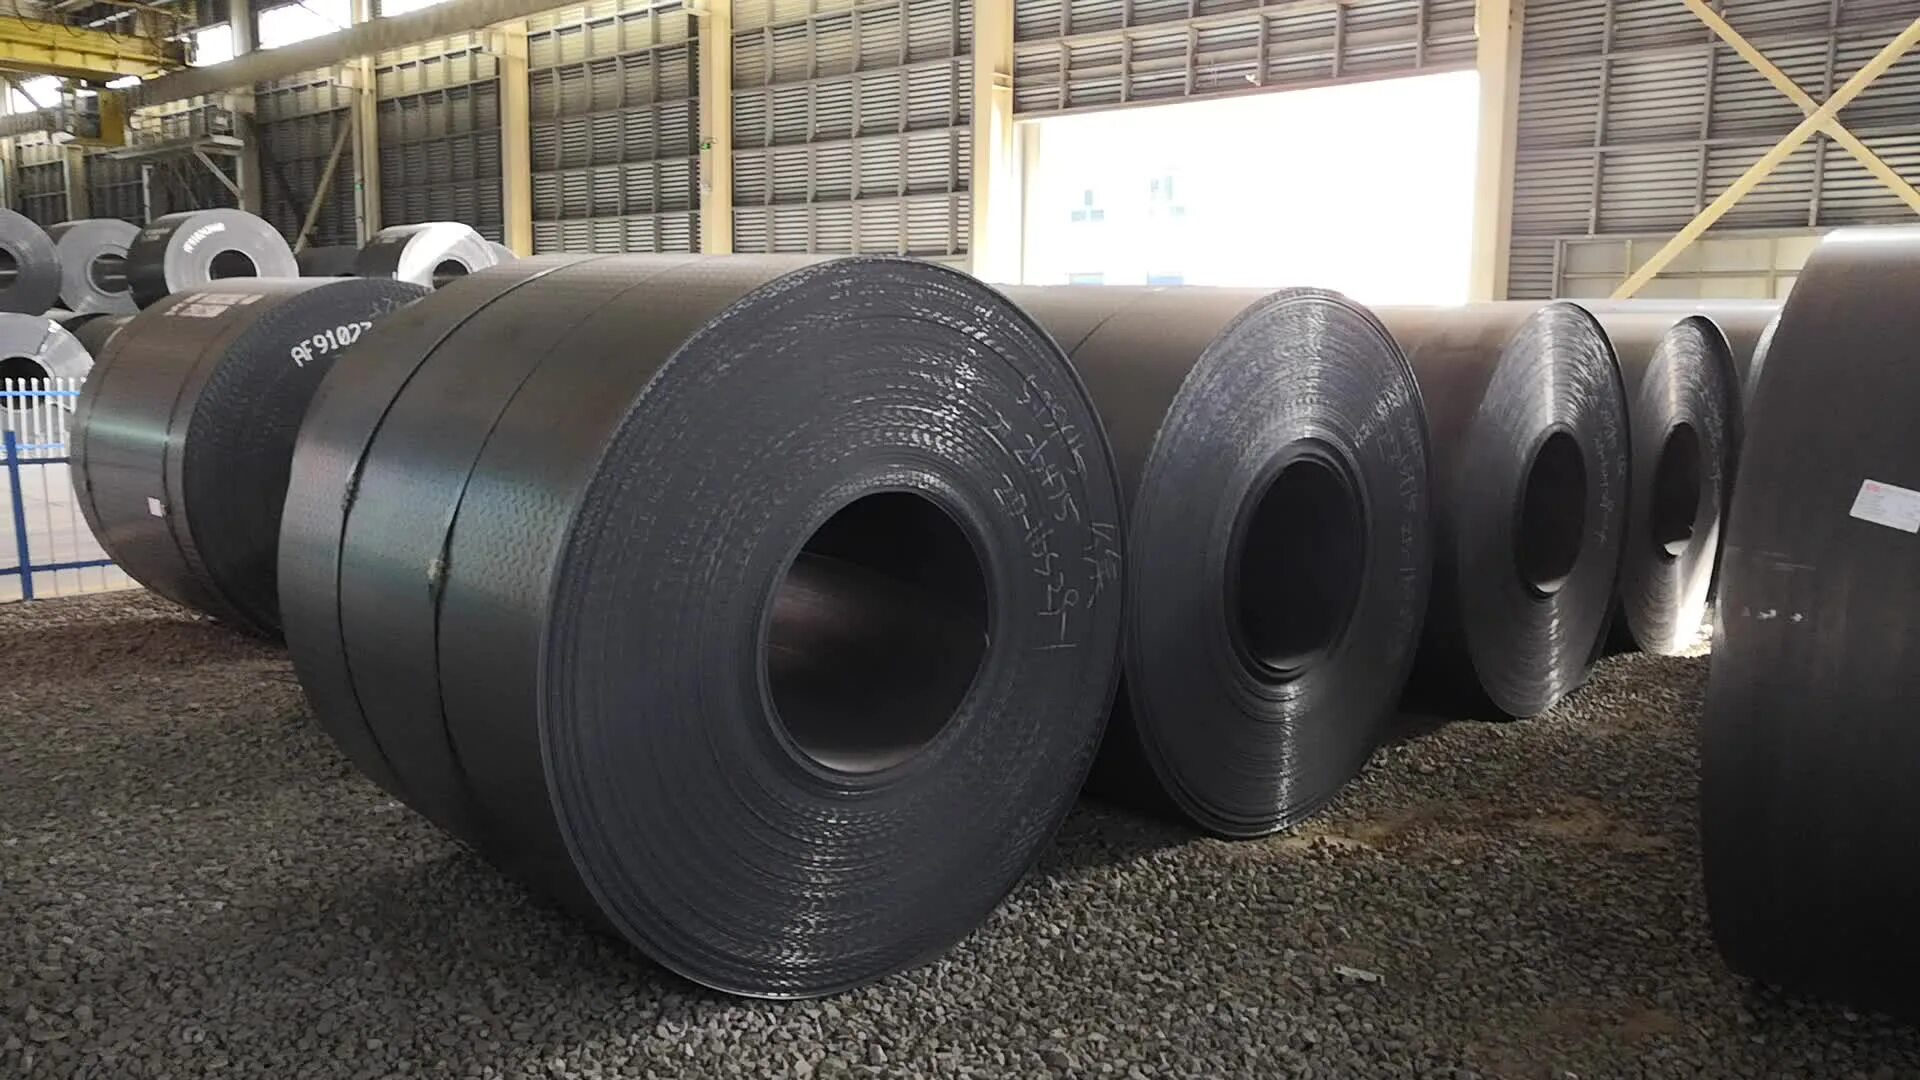 Carbon Steel Coil. Hot rolled Carbon Steel Coil. ASTM a36. Production Carbon Steel Coil.